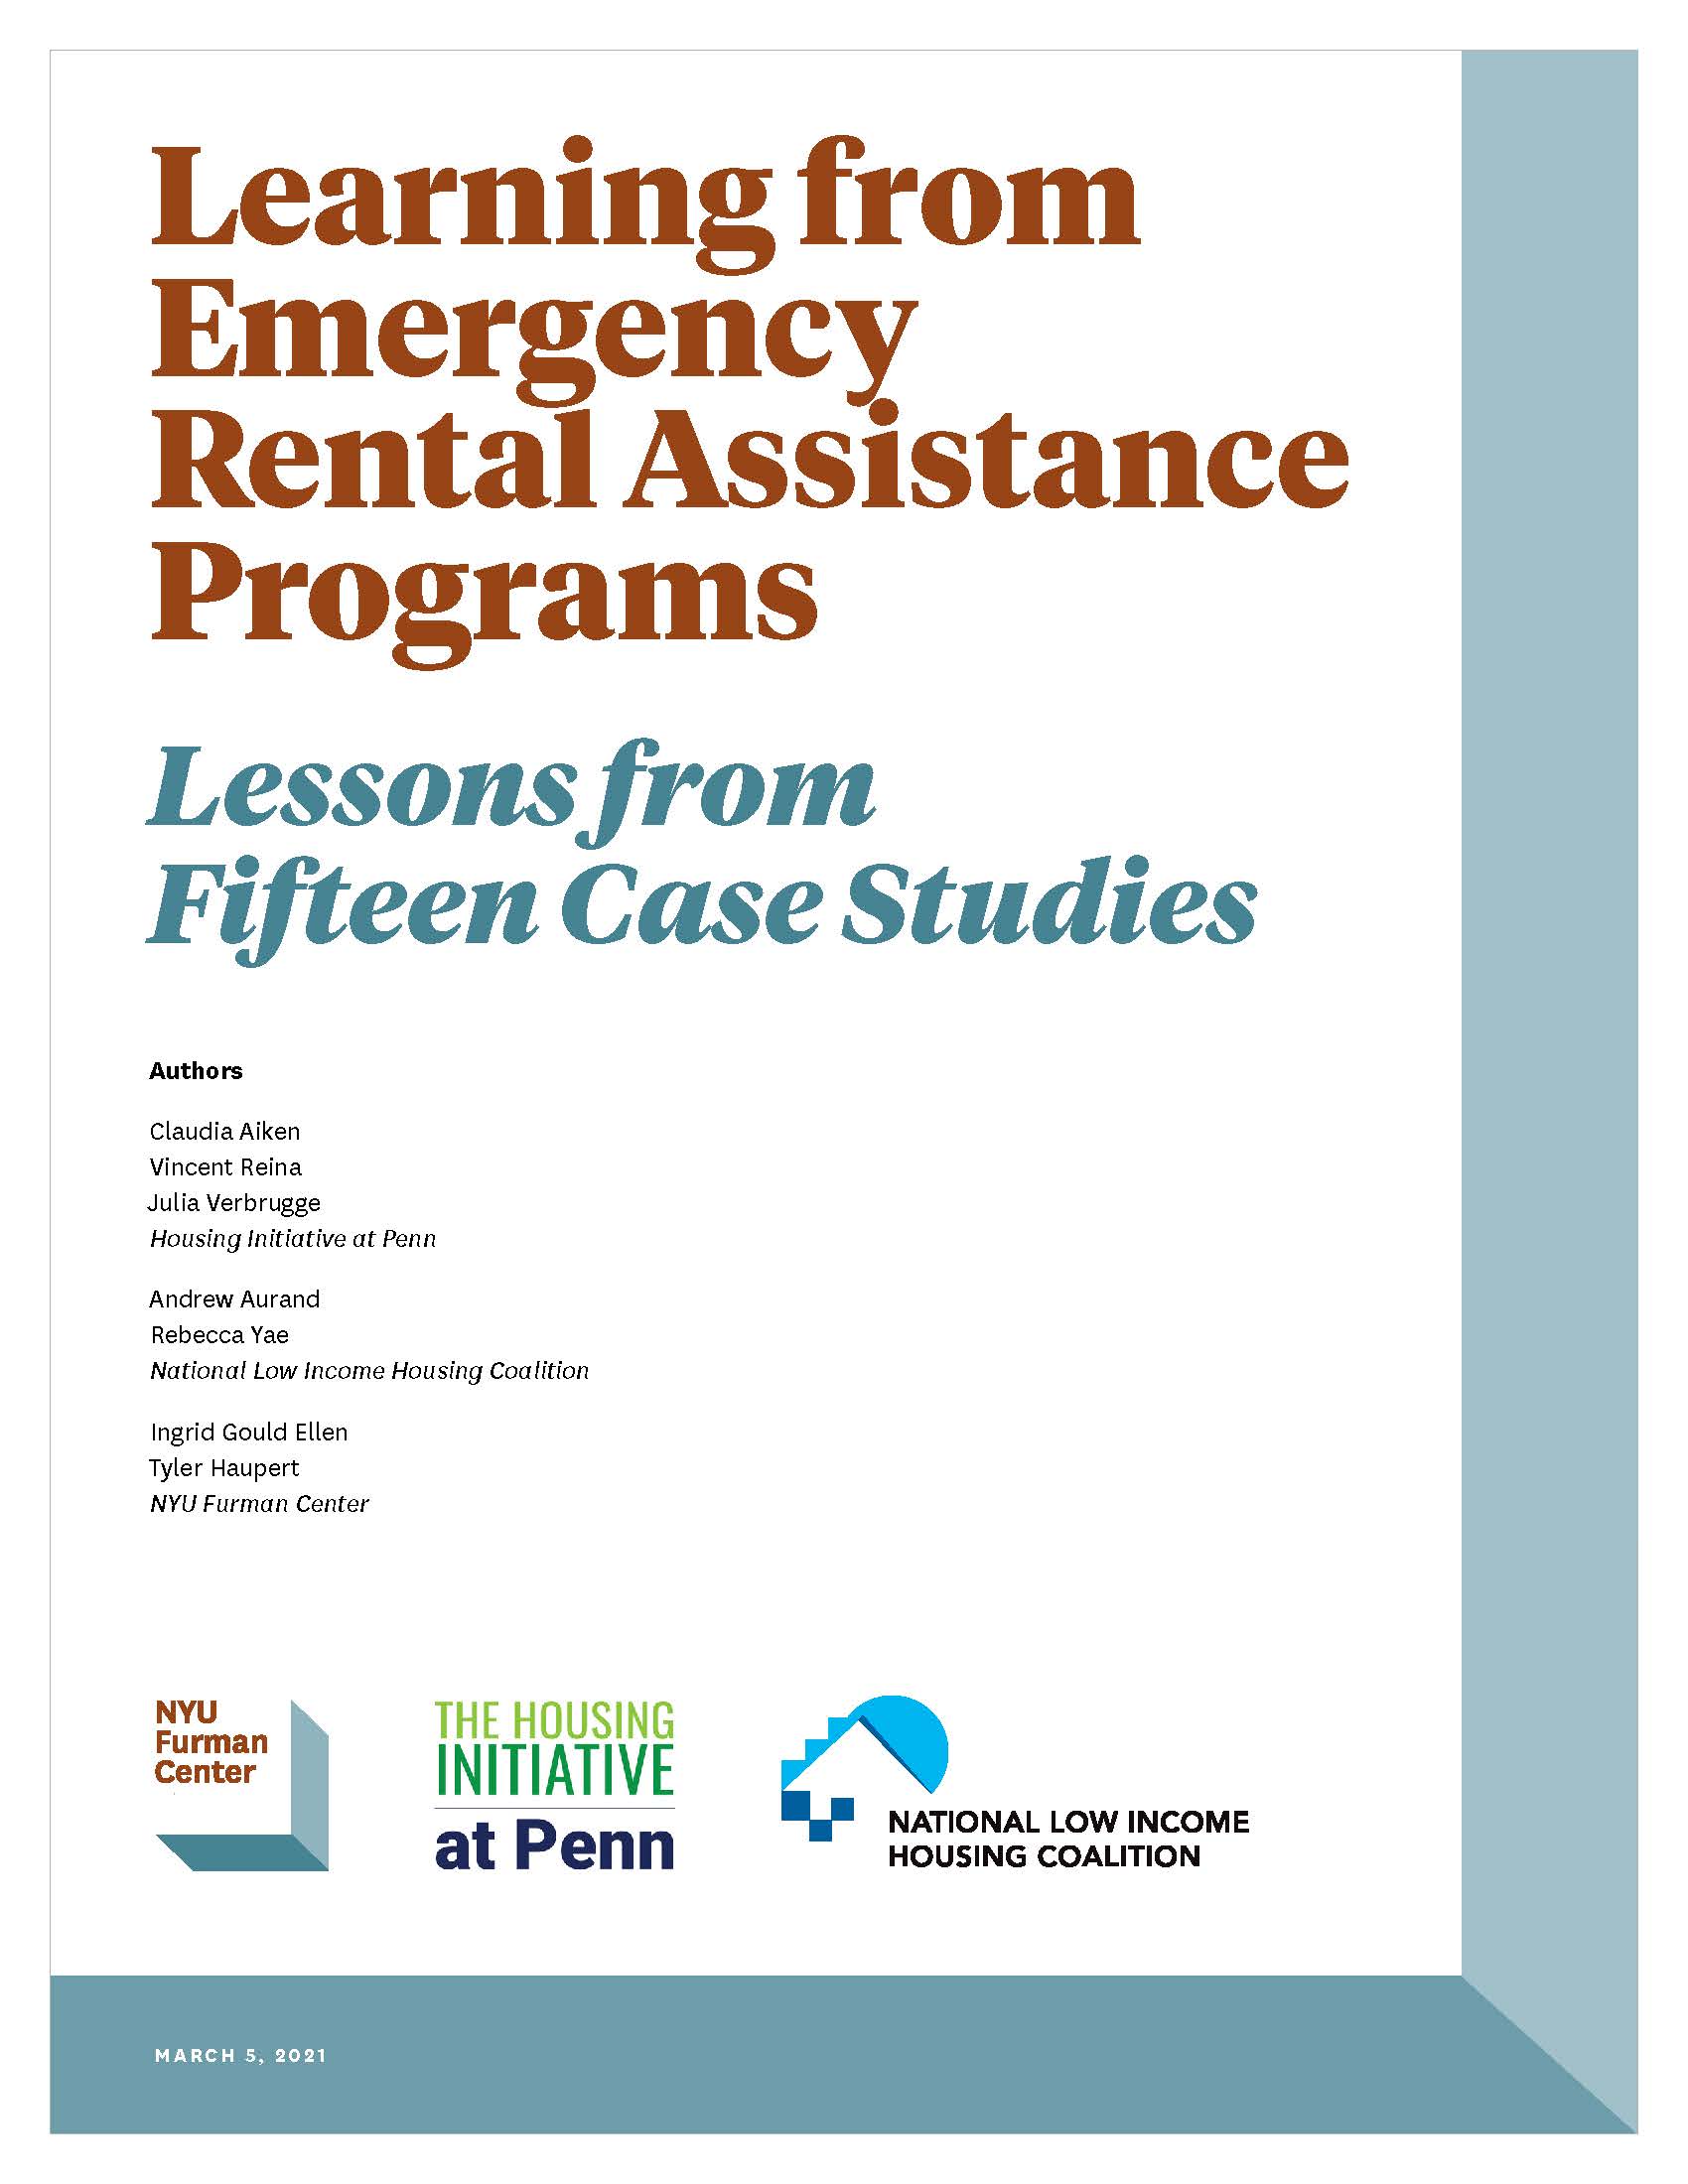 Learning from Emergency Rental Assistance Programs: Lessons from Fifteen Case Studies